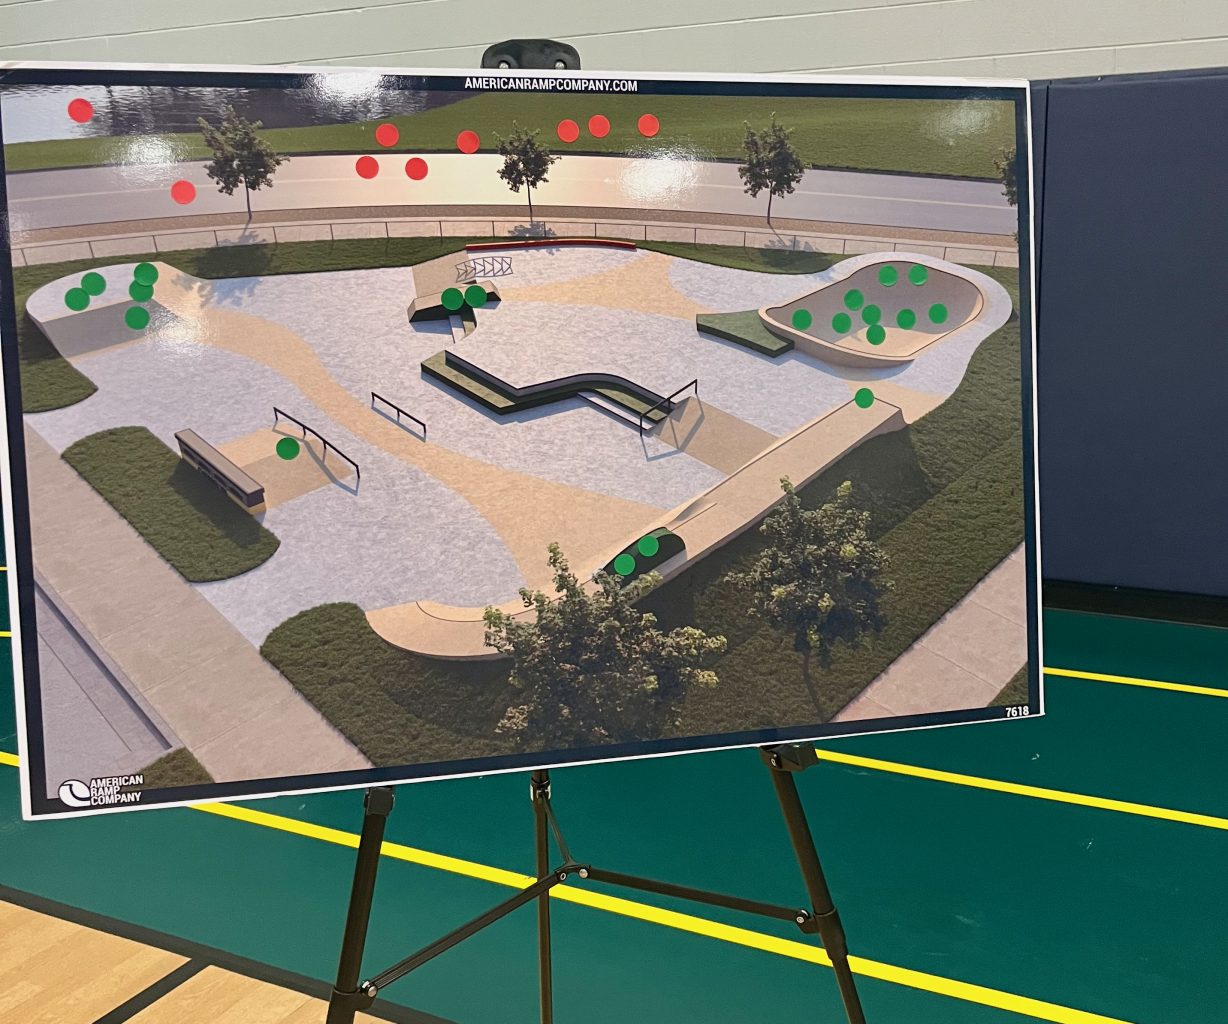 A drawing of a new skate park has clusters of green and red stickers